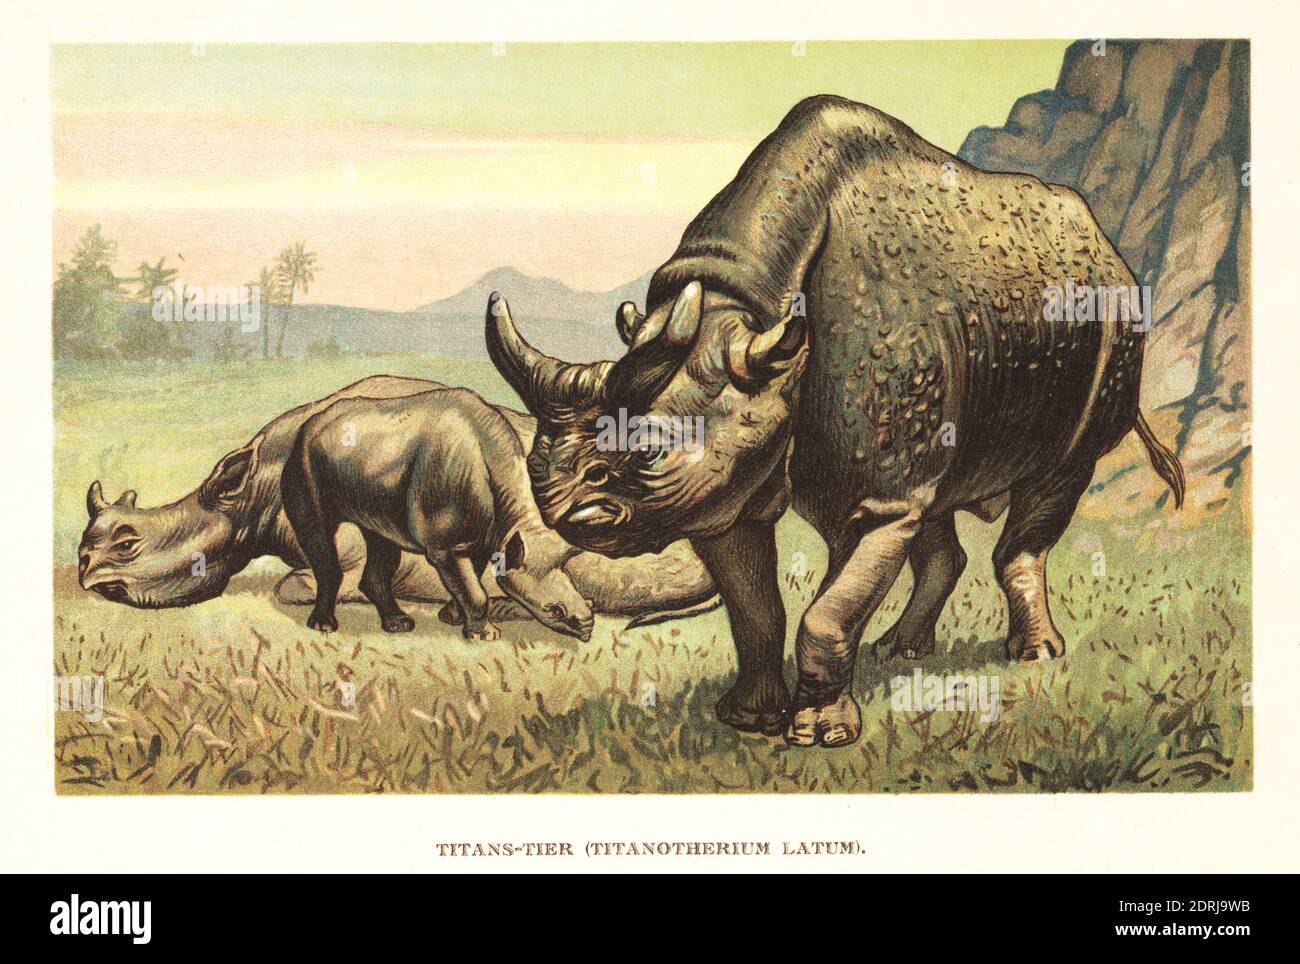 Megacerops, extinct genus of odd-toed ungulates, rhinoceros-like browsers, endemic to North America during the Late Eocene. After a reconstruction by Professor Henry Fairfield Osborn of New York. Titanotherium elatum. Titans-tier, Titanotherium latum. Colour printed illustration by F. John from Wilhelm Bolsche’s Tiere der Urwelt (Animals of the Prehistoric World), Reichardt Cocoa company, Hamburg, 1908. Stock Photo